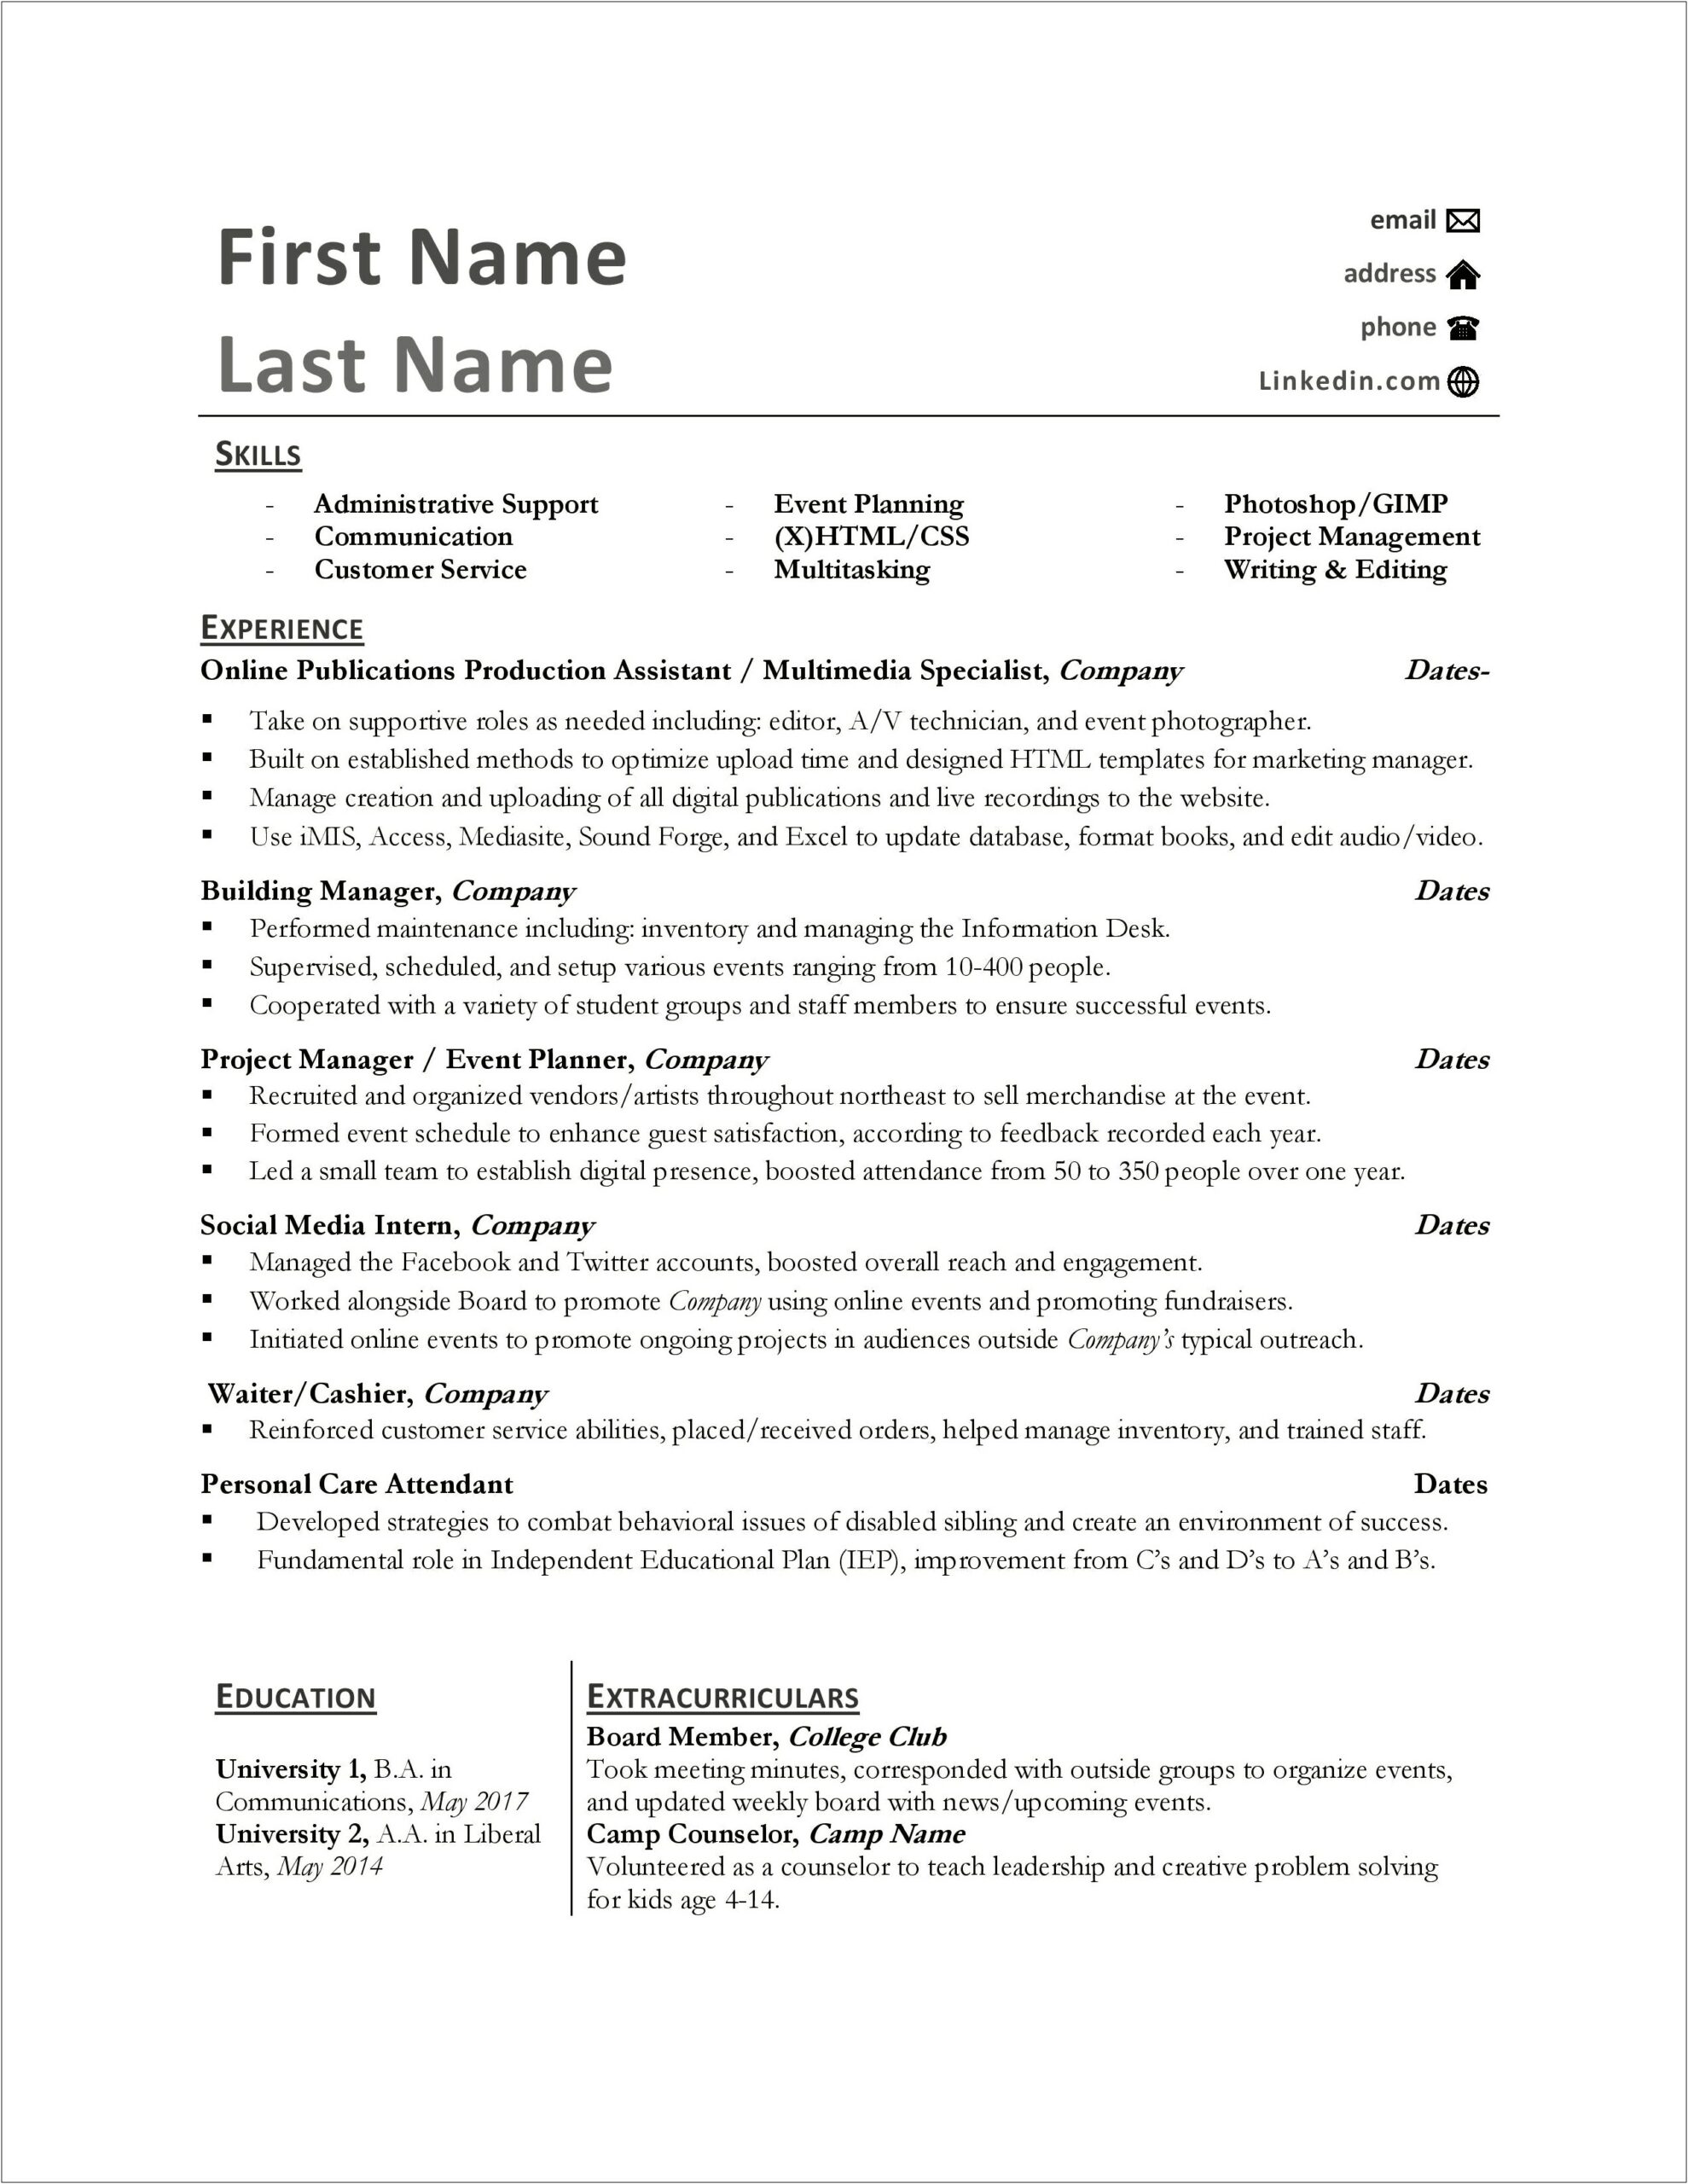 Resume Multiple Roles At One Job